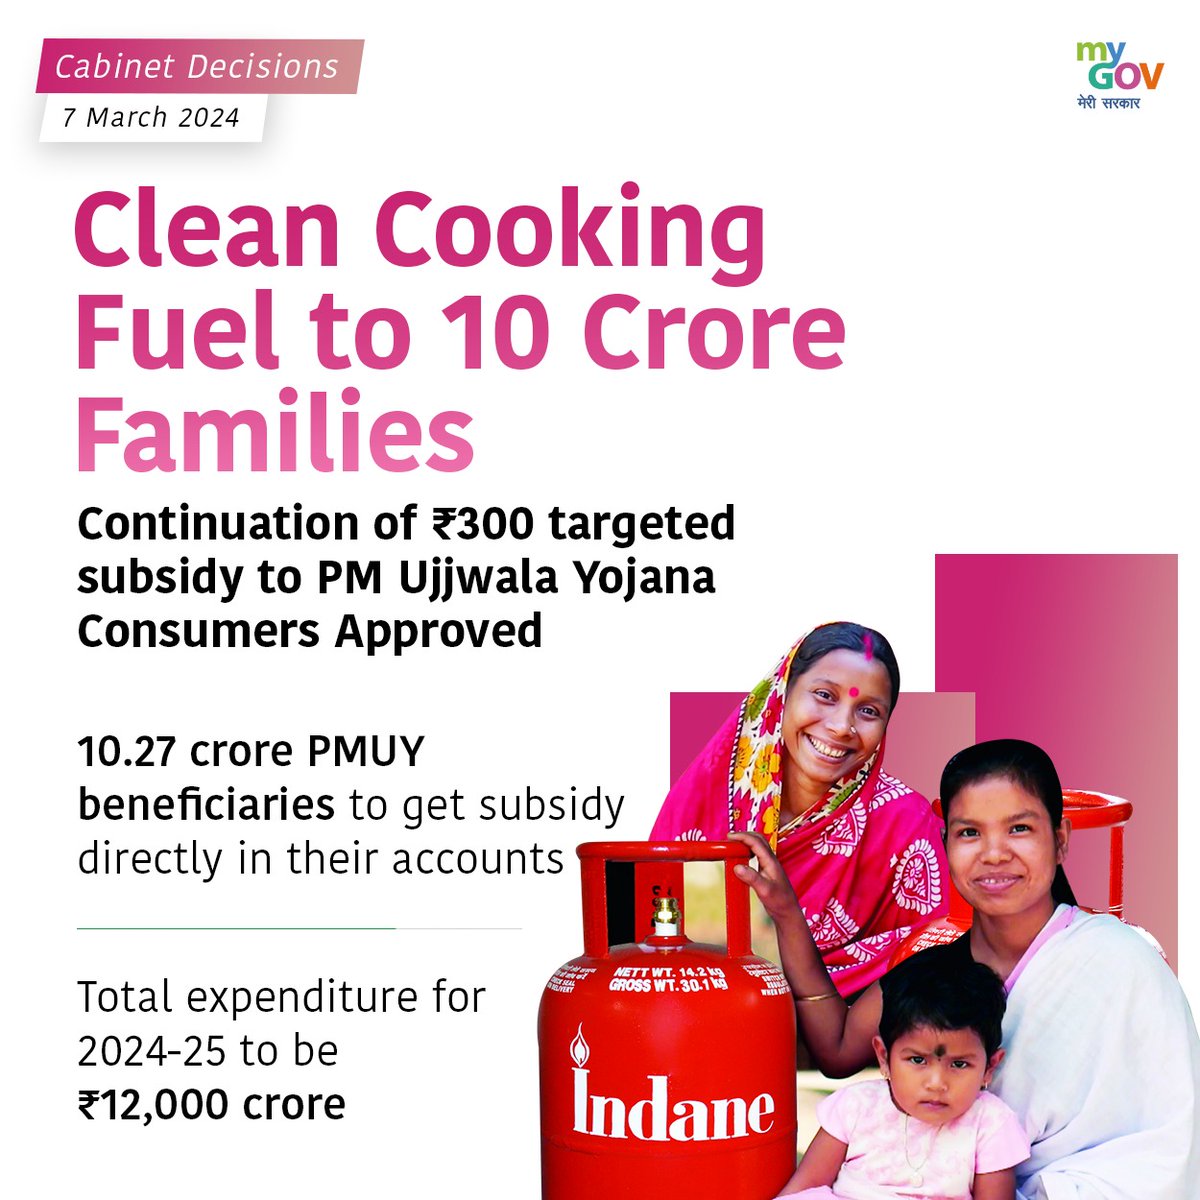 Cabinet approves the continuation of Rs 300 targeted subsidy to PM Ujjwala Yojana consumers. 10.27 crore beneficiaries set to receive direct subsidies in their accounts. Total expenditure for 2024-25 estimated at Rs 12,000 crore.

#CabinetDecisions